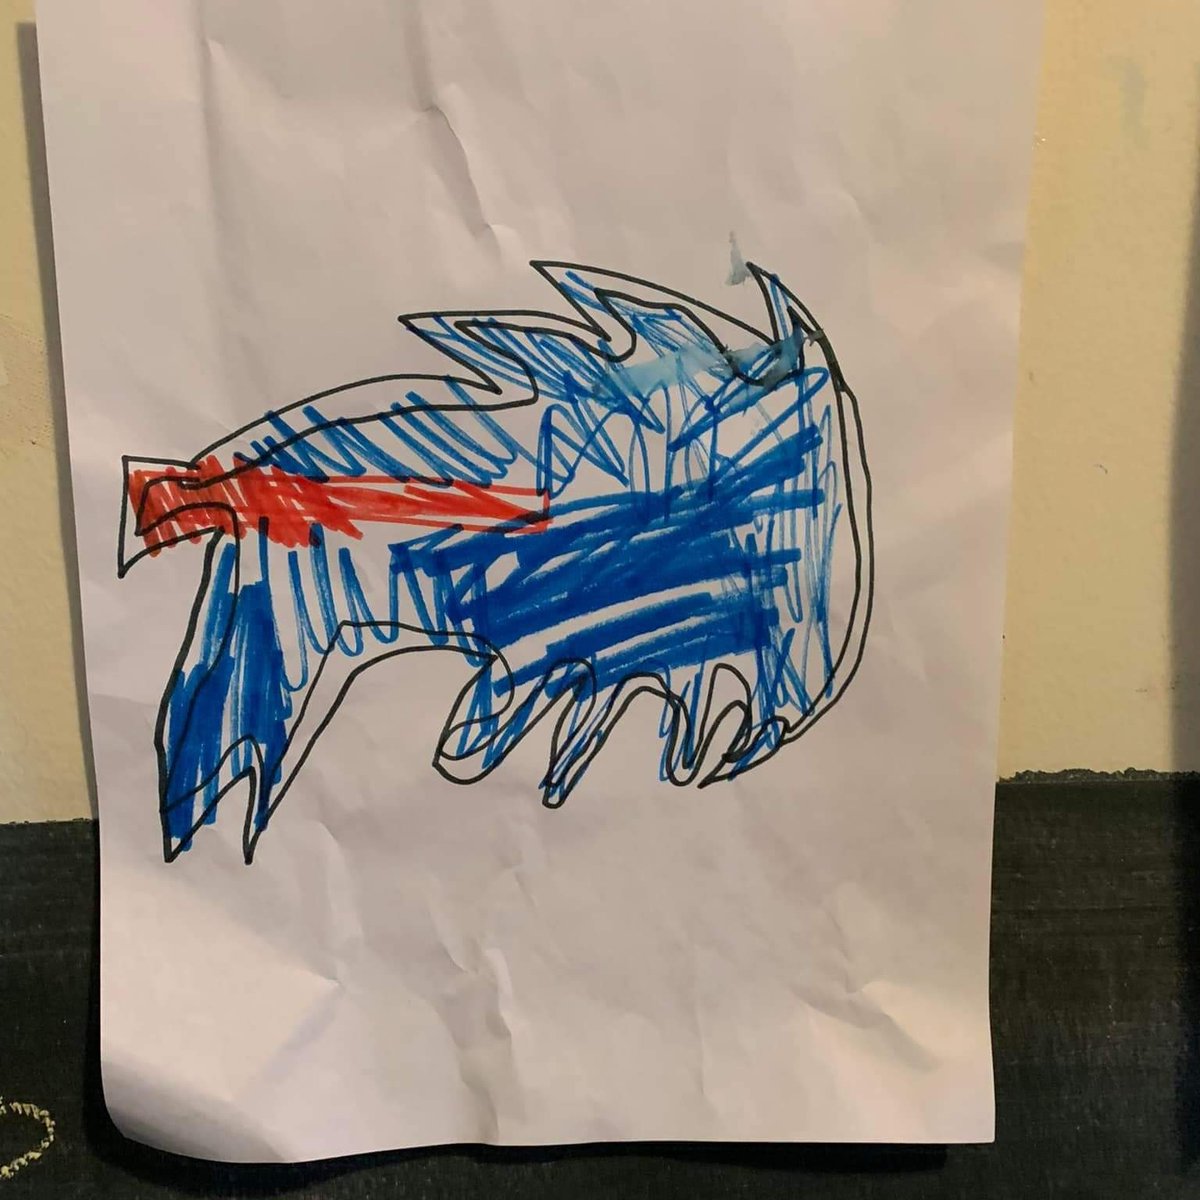 'So my 7yr old nephew made this in school and some kid on the bus told him it looks nothing like the Bills logo. My nephew cried the whole way home. I’m asking everyone to share this, so we can show him all the love, and help him feel better... (cont)